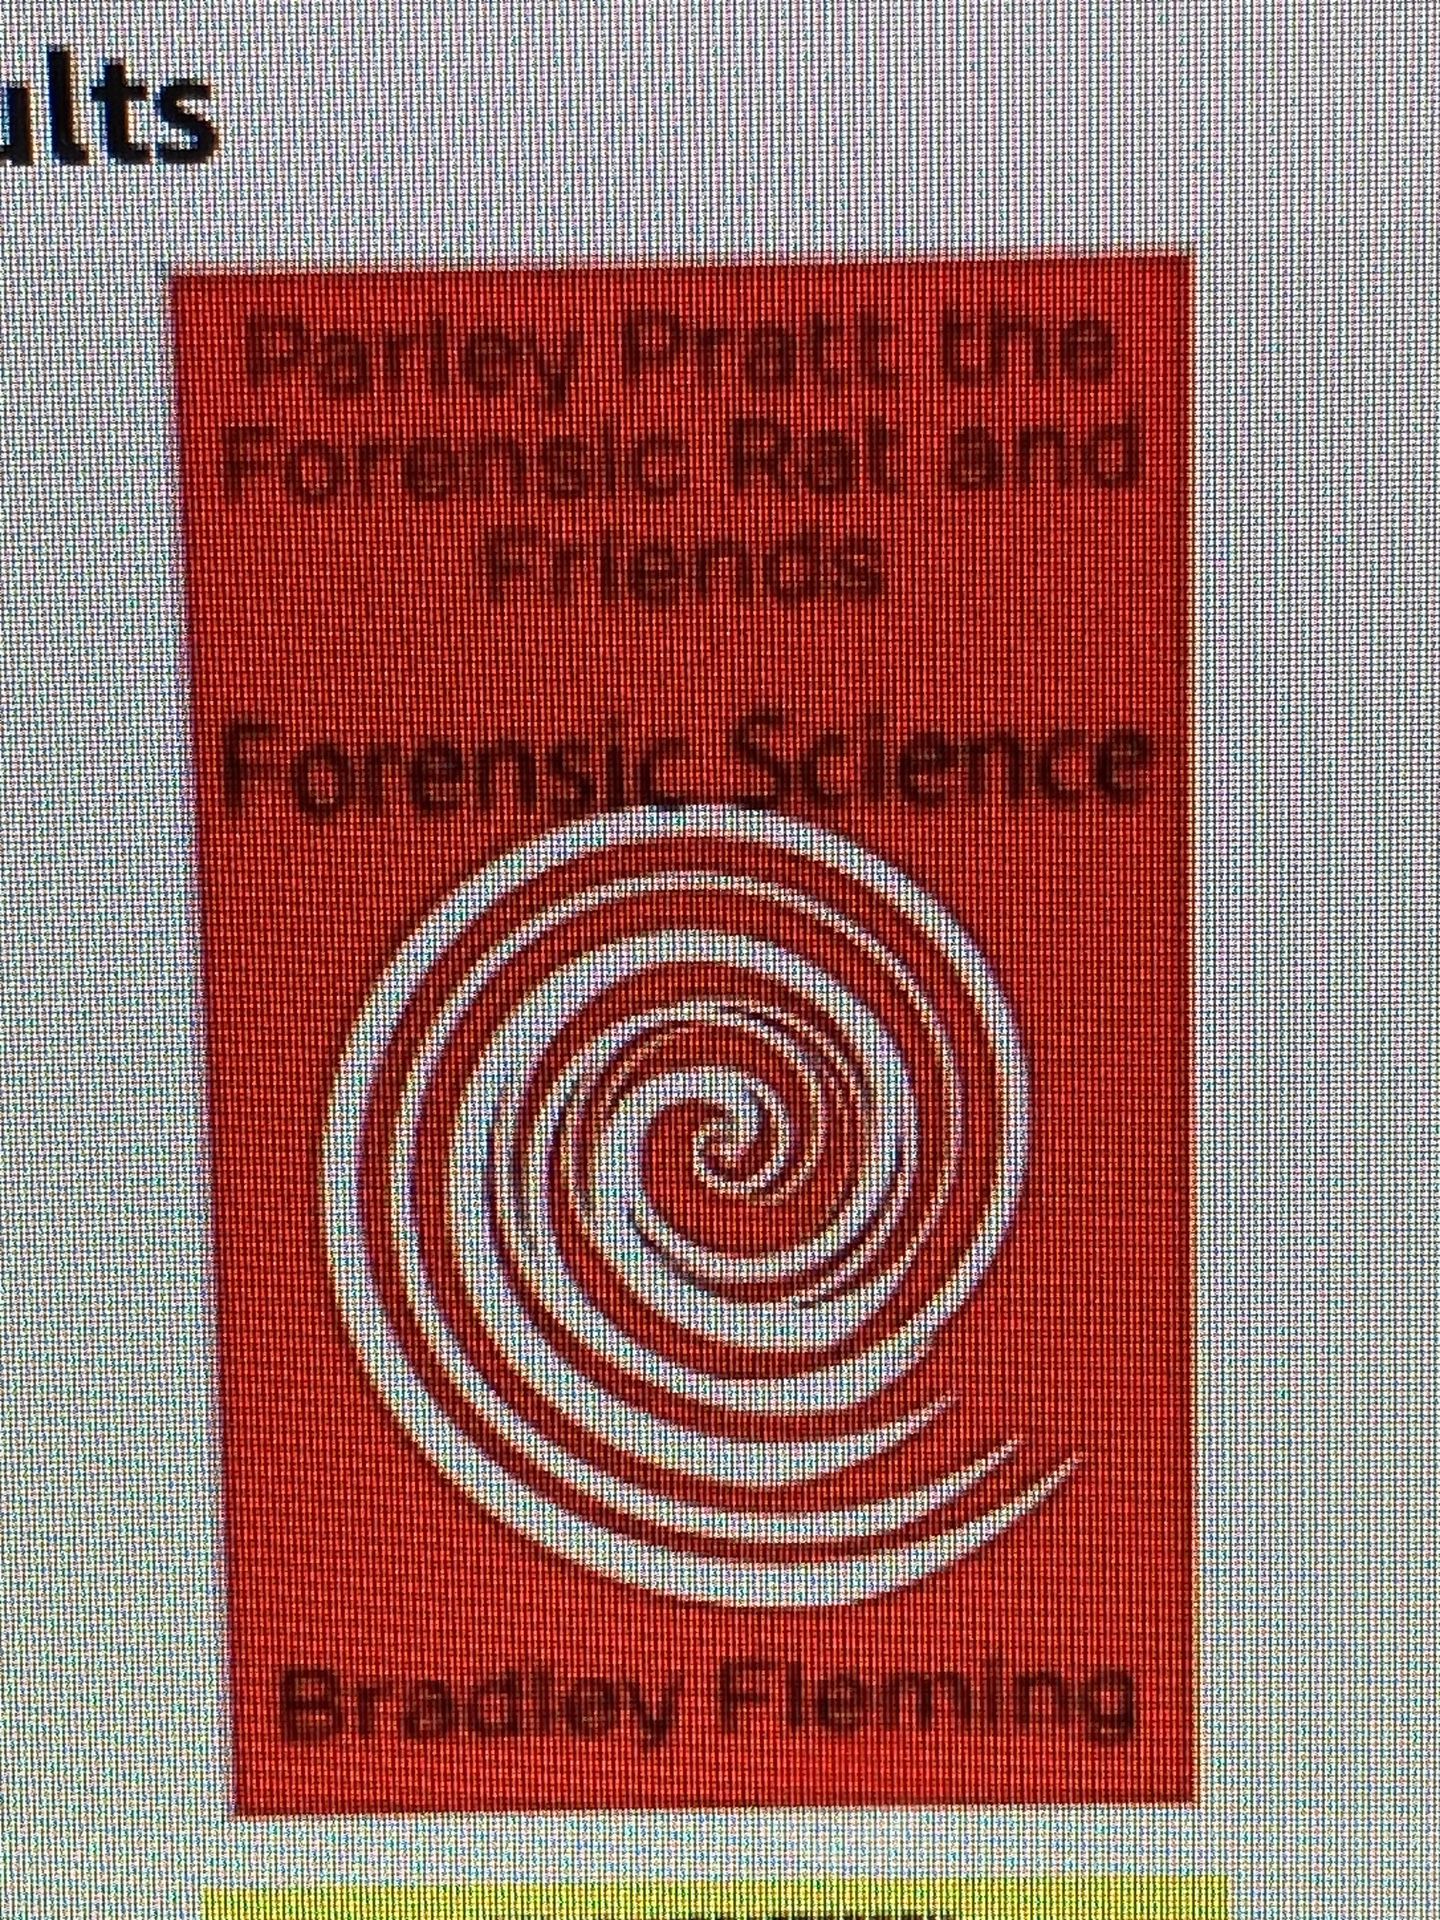 Parley Pratt the Forensic Rat and Friends e-book (6 to 14 years)